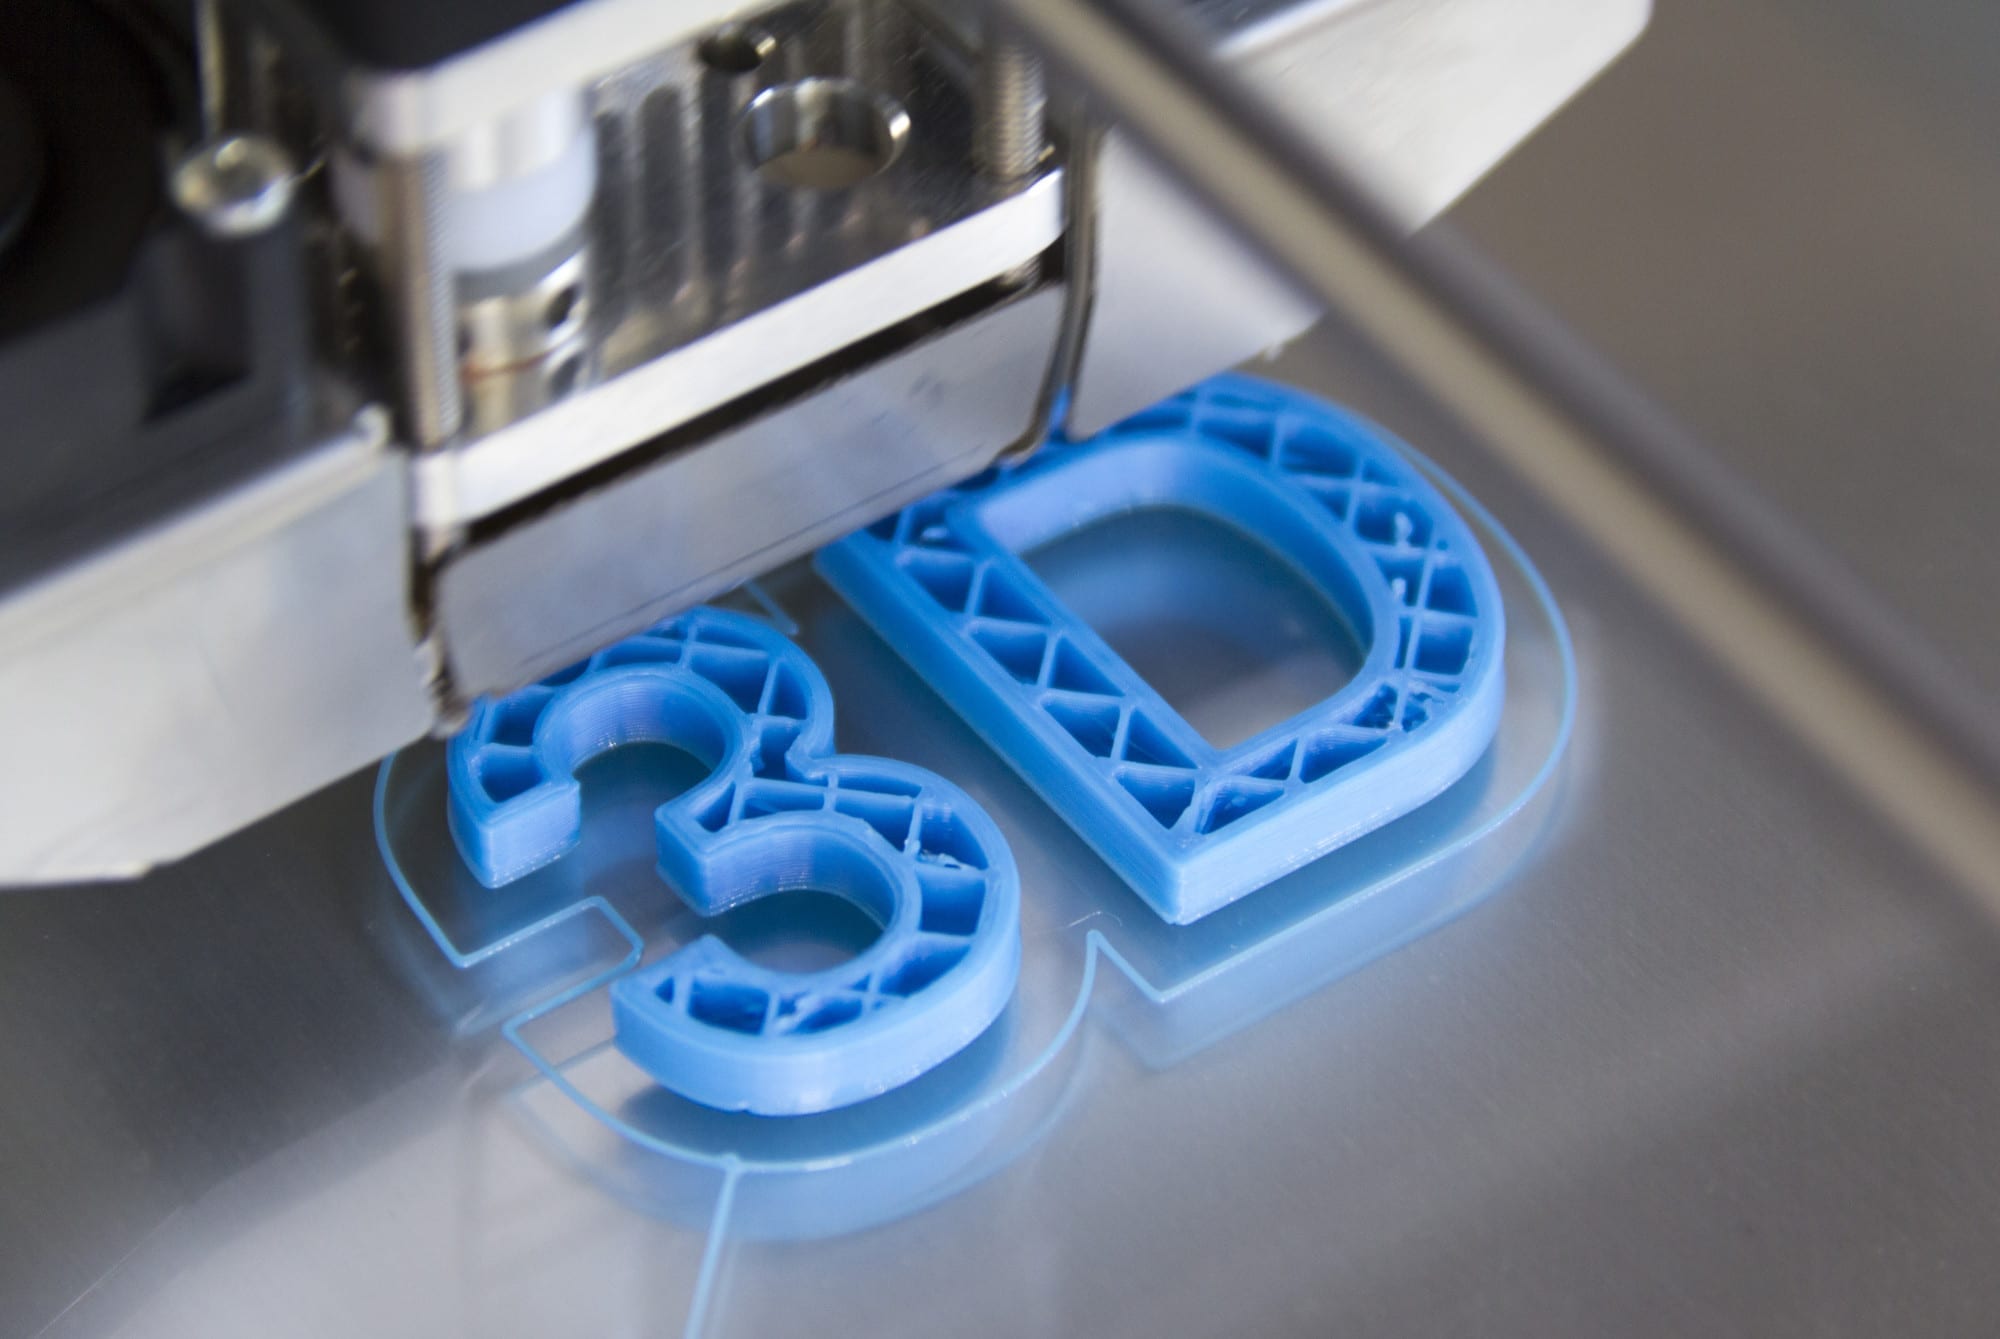 10 Amazing 3D Printing Facts You Never Knew - 3Dprintingfacts